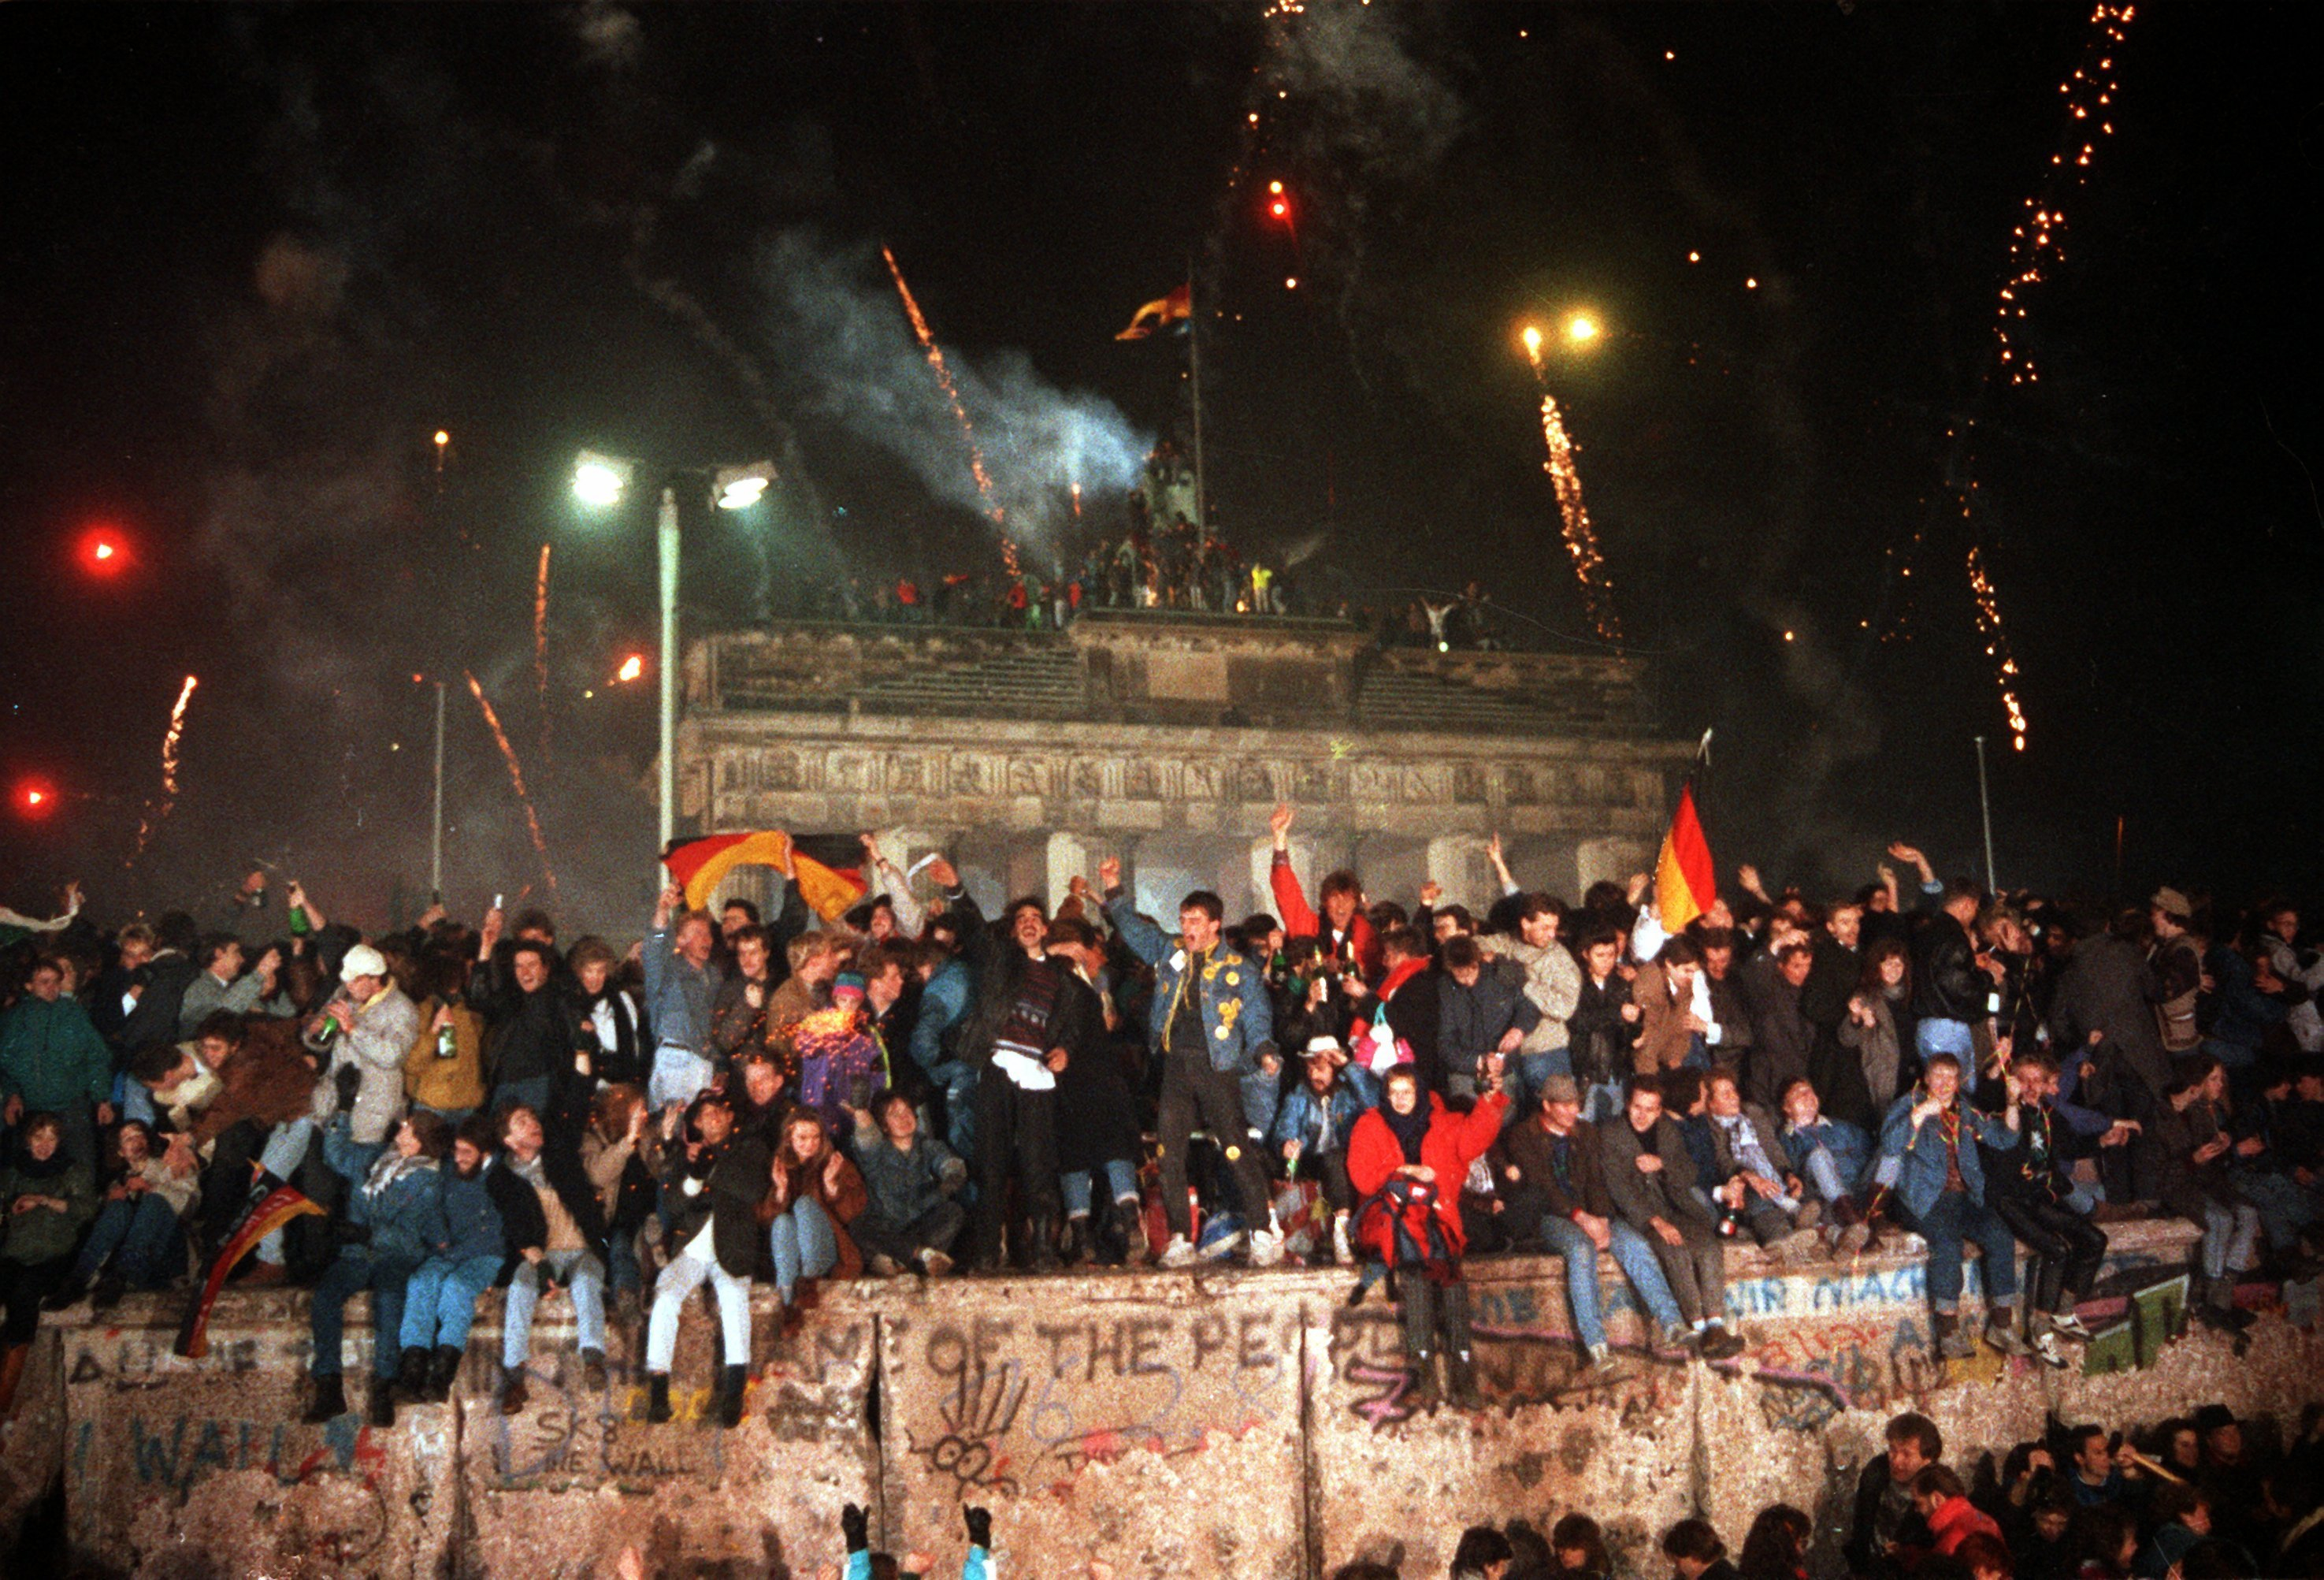 Celebration at the fall of the Berlin Wall, and Beethoven's Ninth Symphony was there.